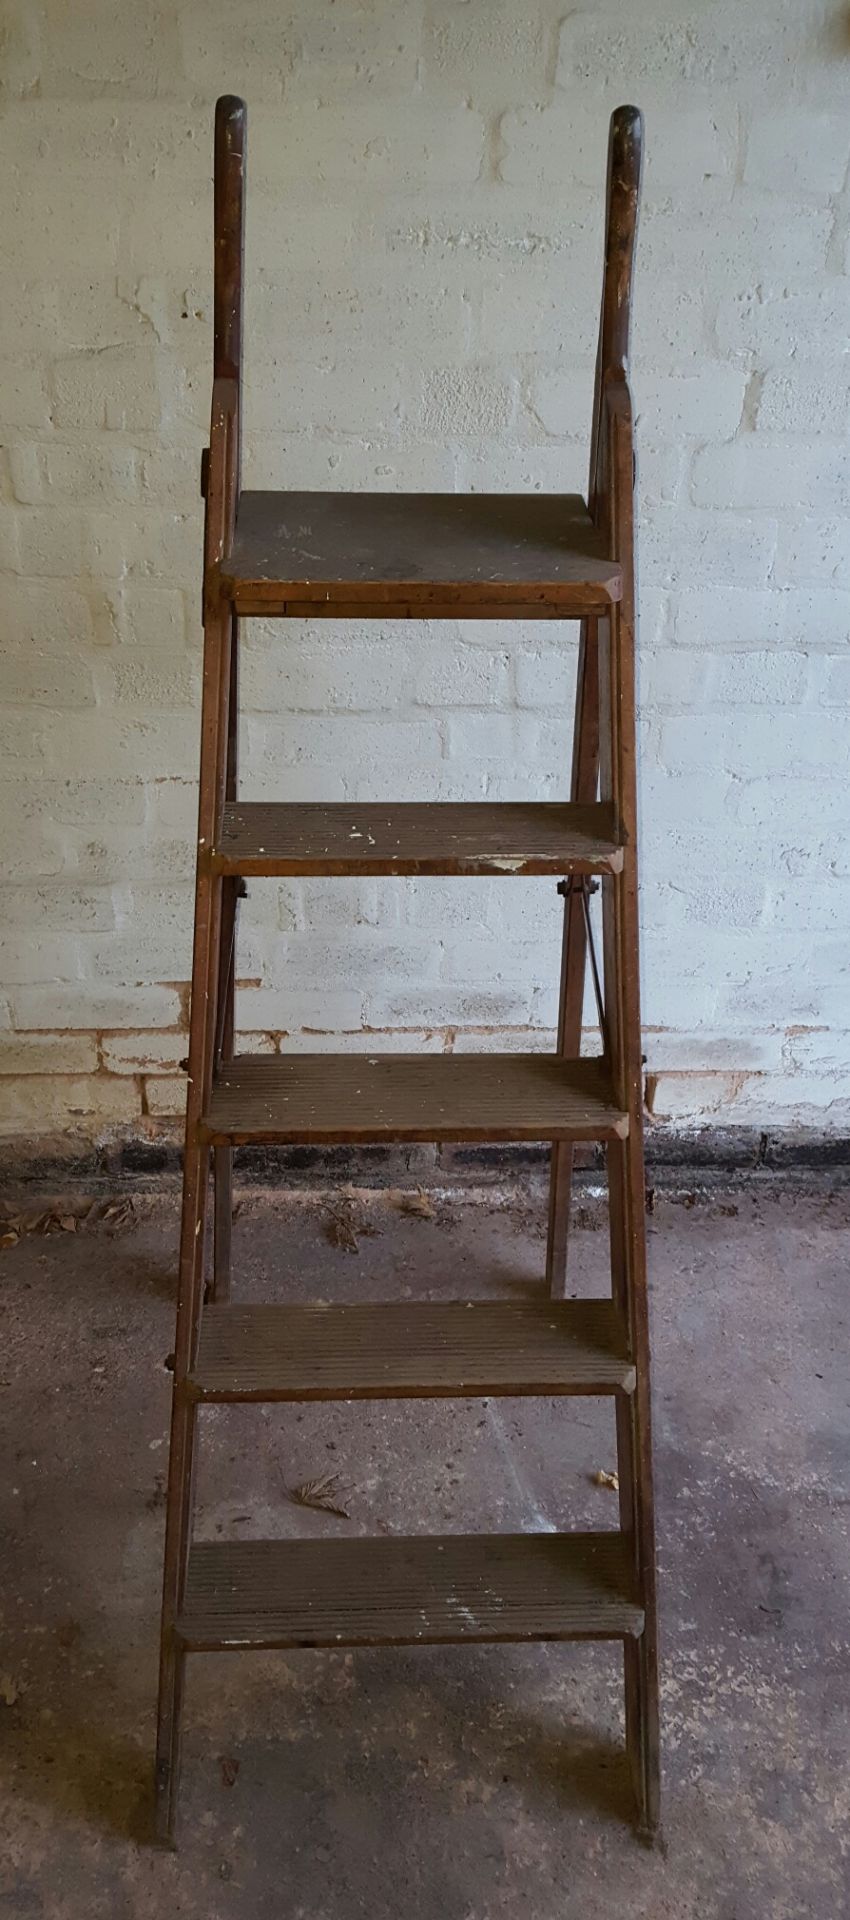 2 x Vintage Wooden Step Ladders Plus 1 other - Image 3 of 3